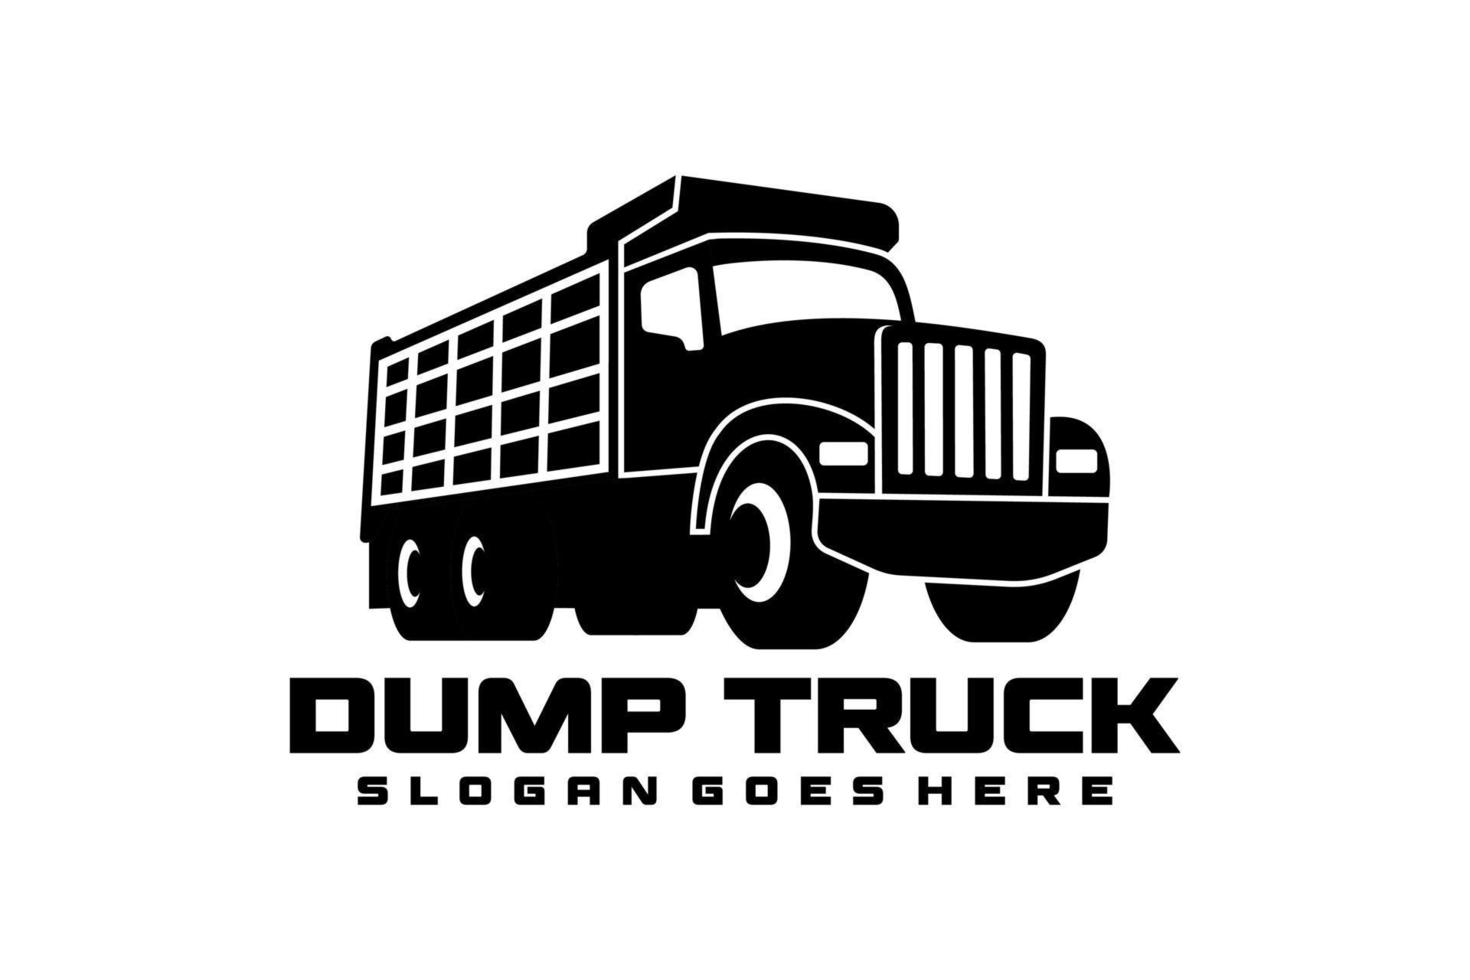 Dump truck, Tipper truck silhouette vector black and white isolated